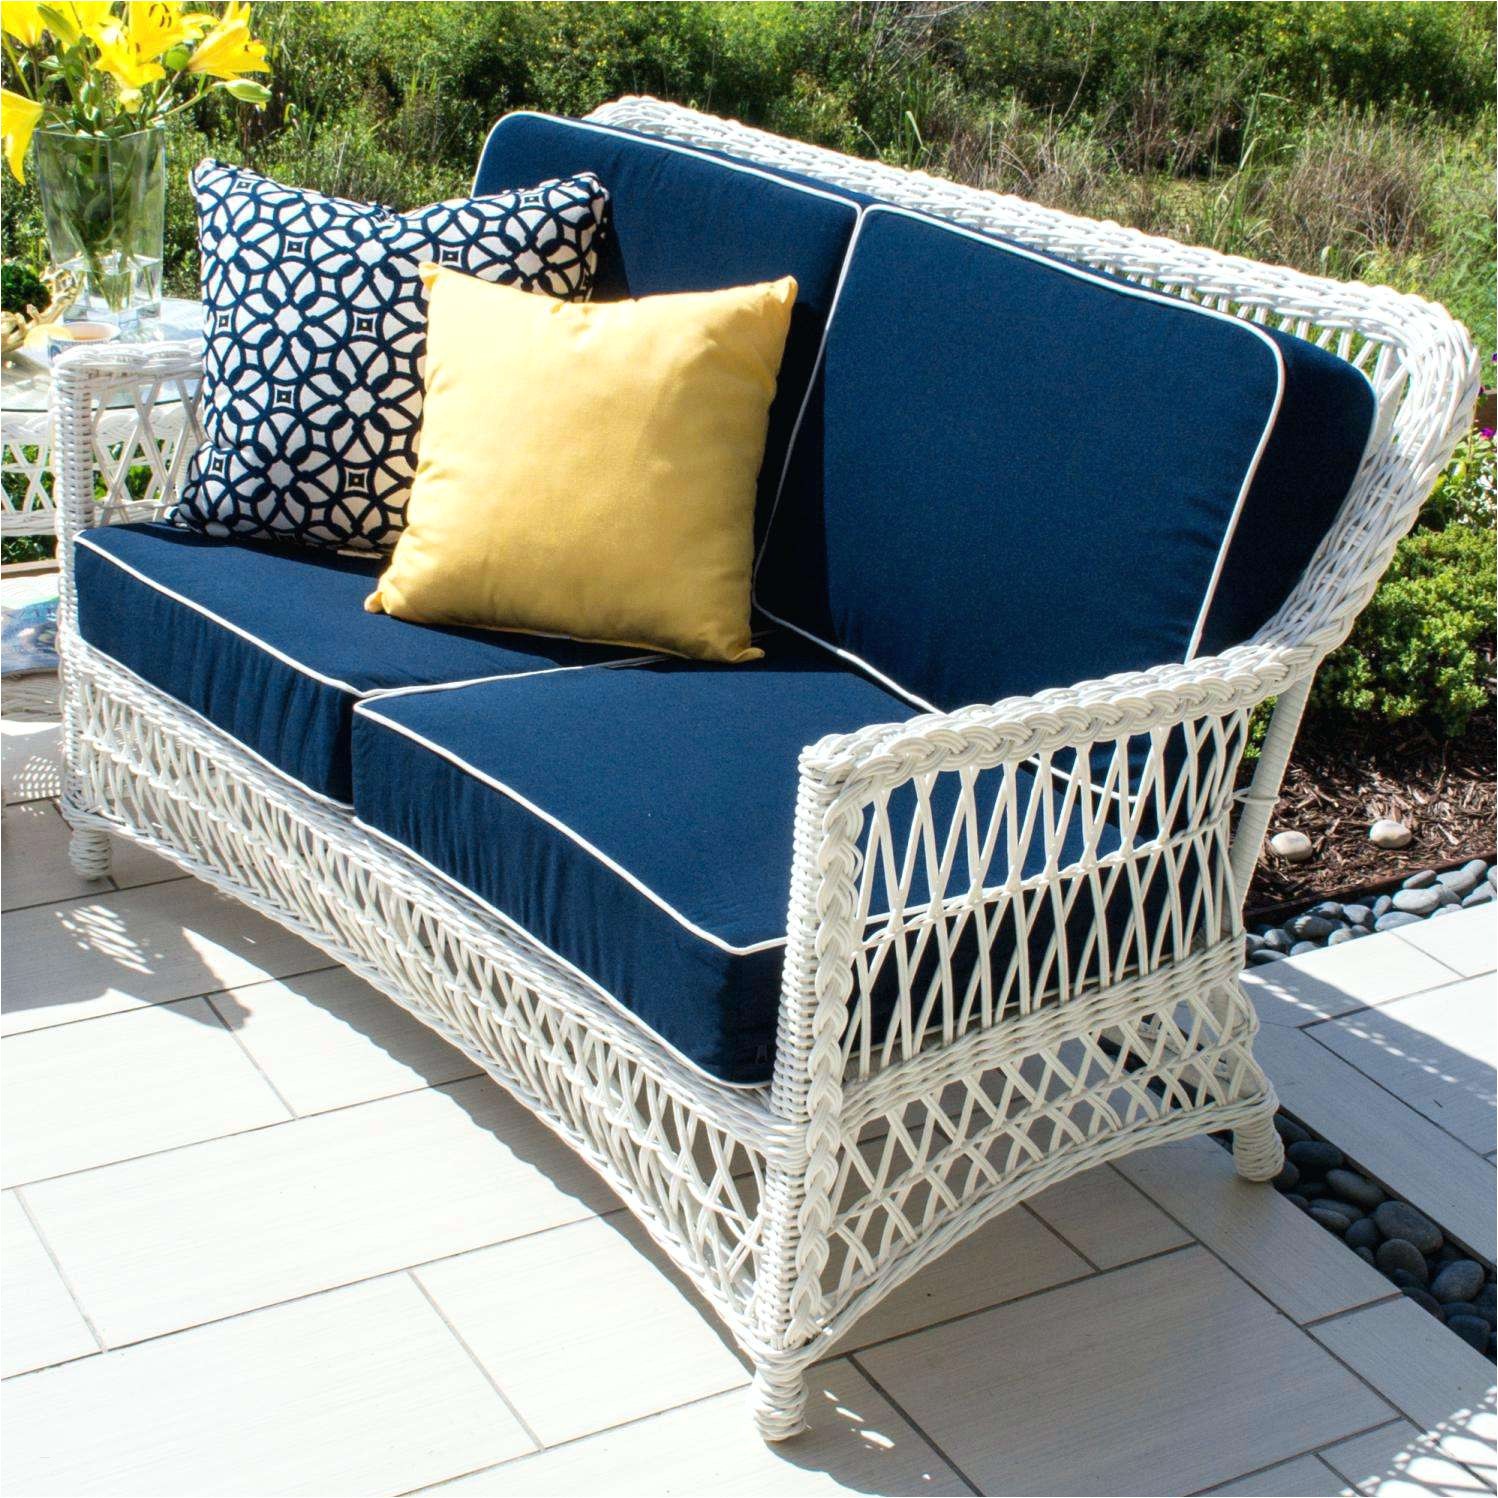 Sofas On Sale at Target Outdoor Cushions Target Lovely Wicker Outdoor sofa 0d Patio Chairs